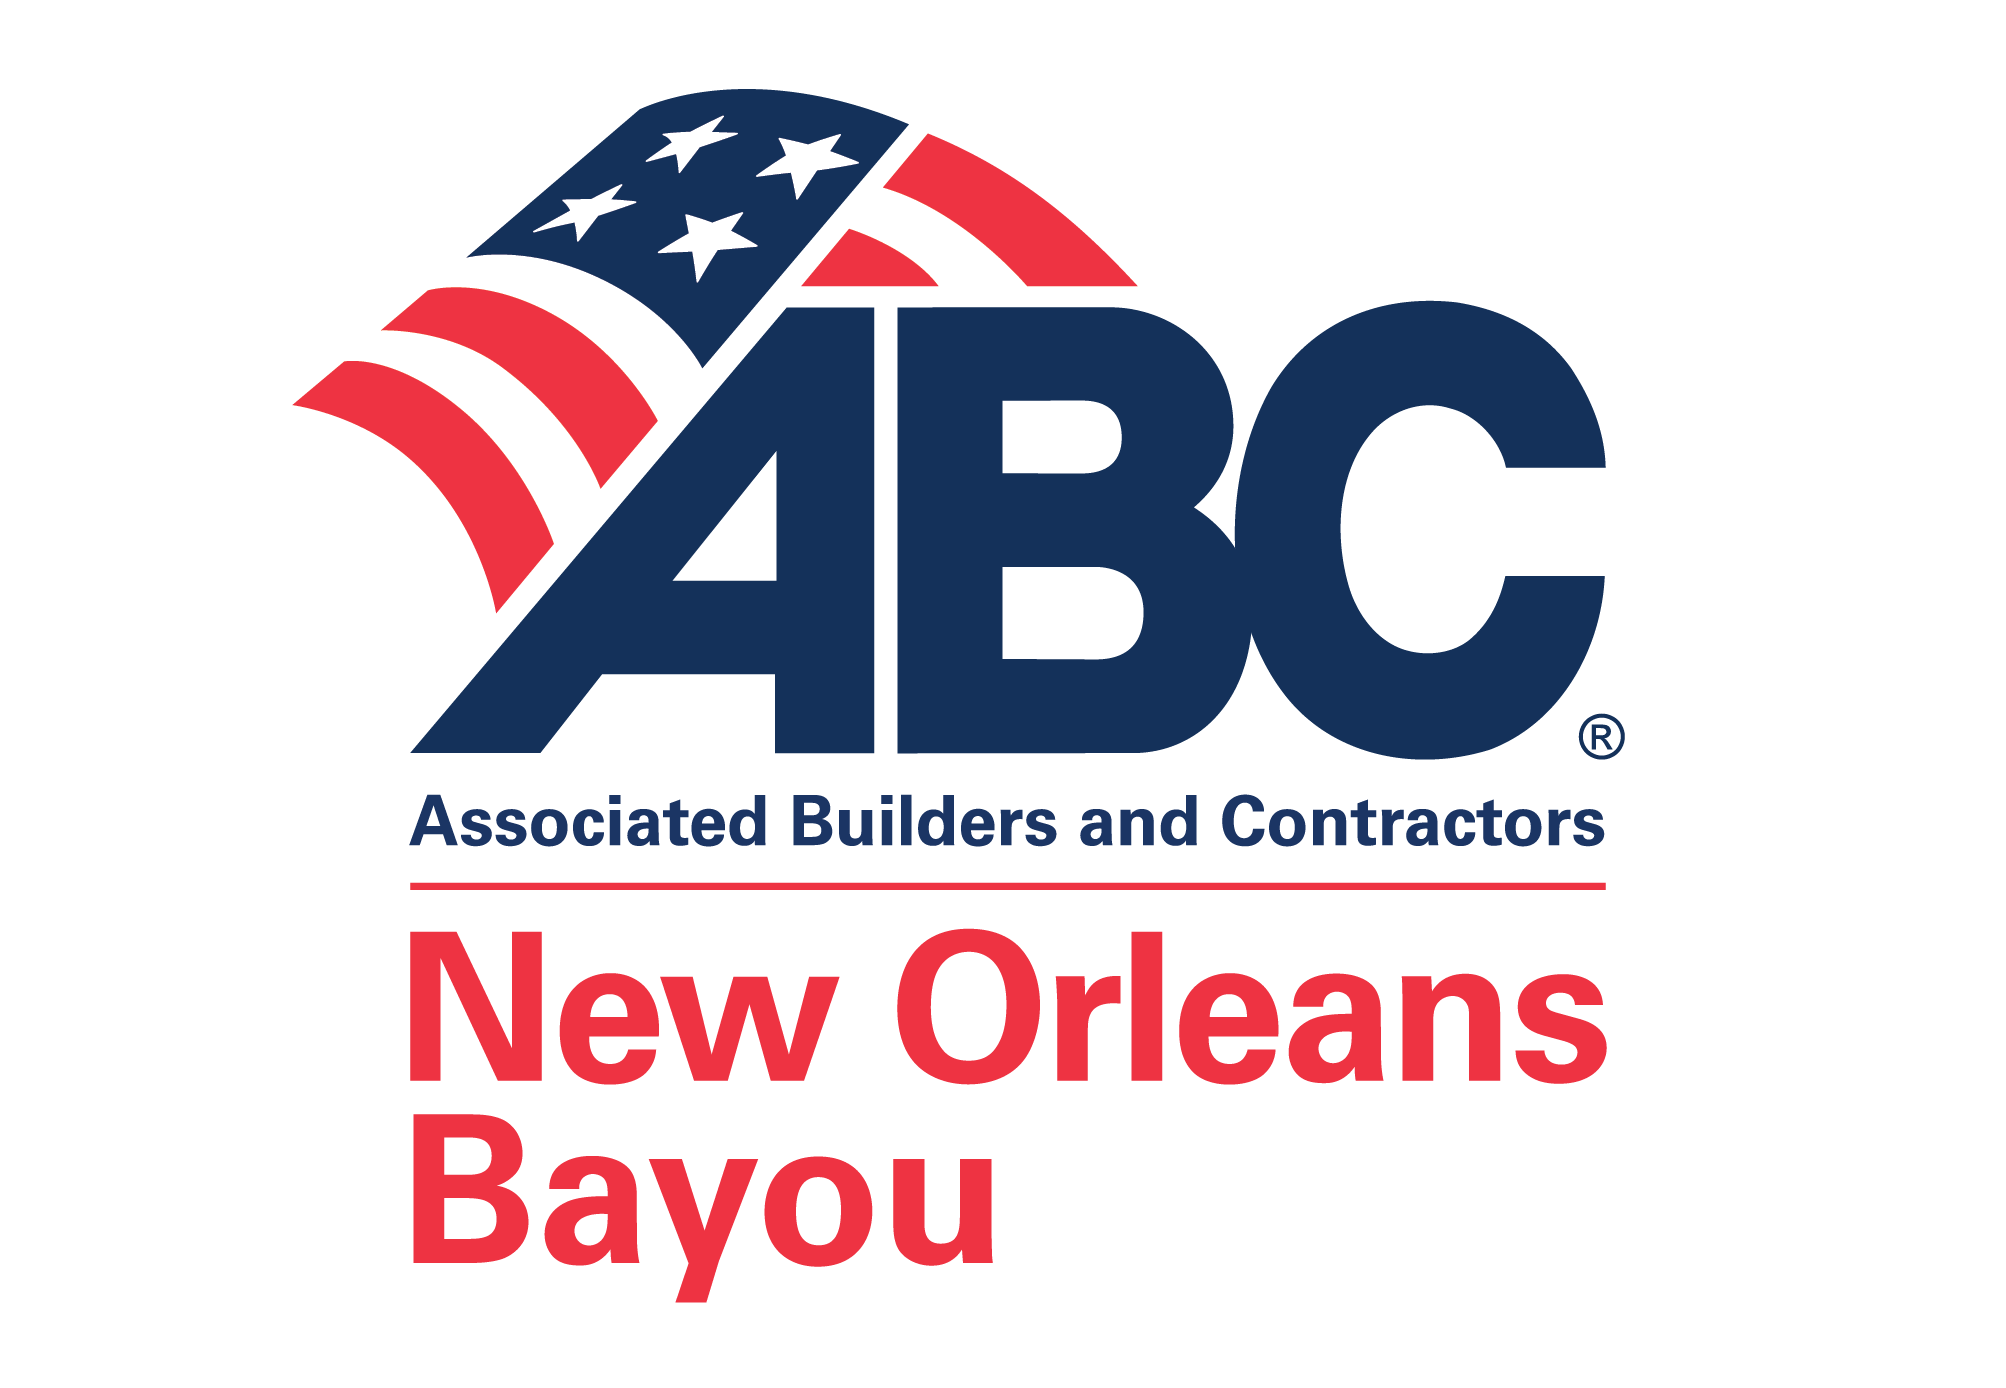 Associated Builders and Contractors - ABC Bayou Chapter